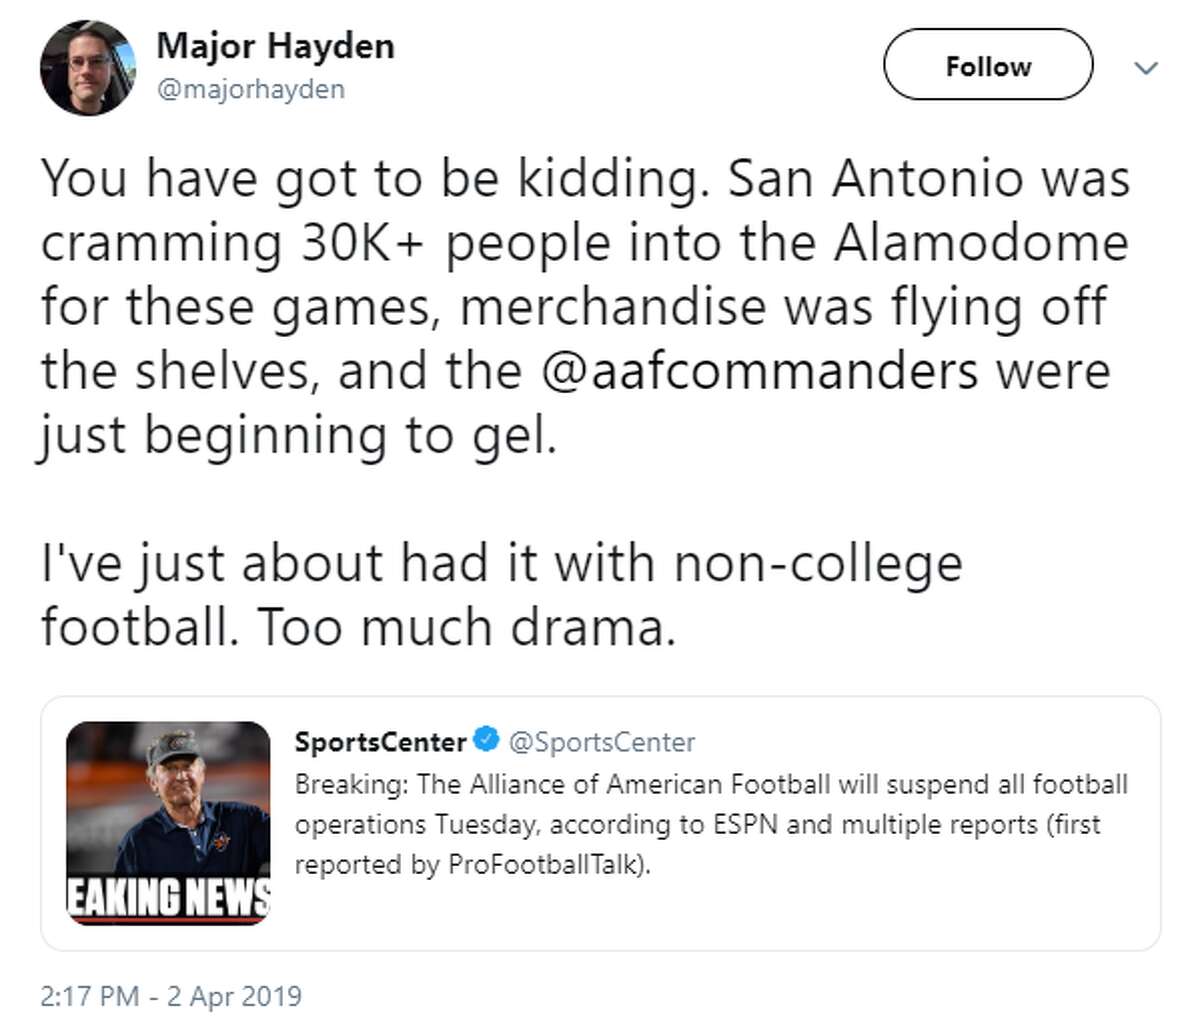 @majorhayden: You have got to be kidding. San Antonio was cramming 30K+ people into the Alamodome for these games, merchandise was flying off the shelves, and the @aafcommanders were just beginning to gel.